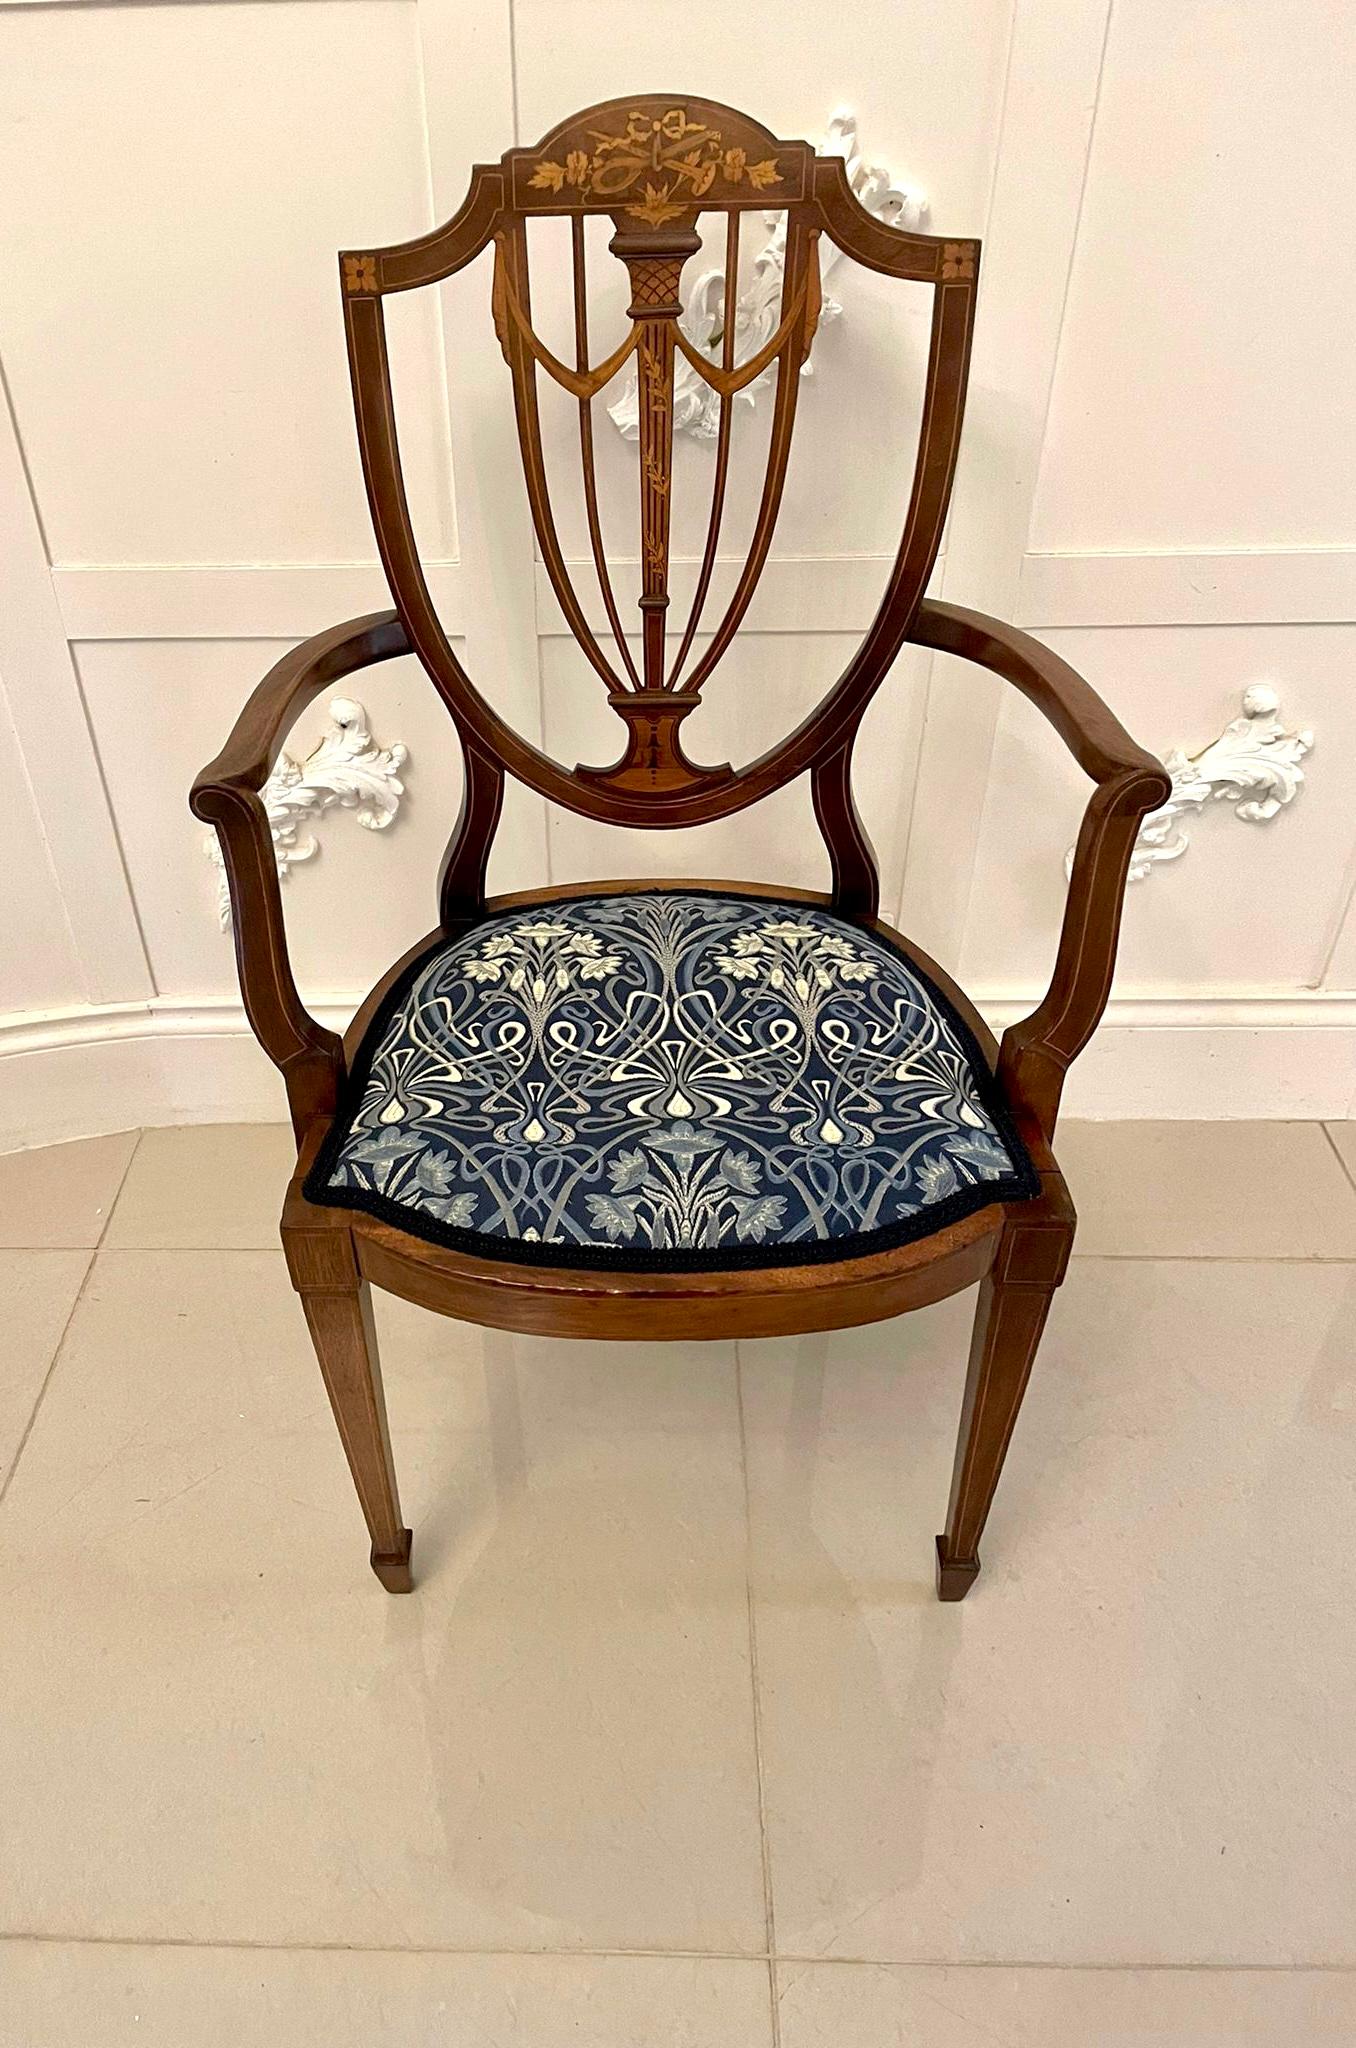 Fine quality antique mahogany inlaid desk chair having a fine quality mahogany inlaid shield-shaped back inlaid with musical instruments in satinwood, newly reupholstered serpentine shaped seat in a quality fabric, shaped open arms with satinwood